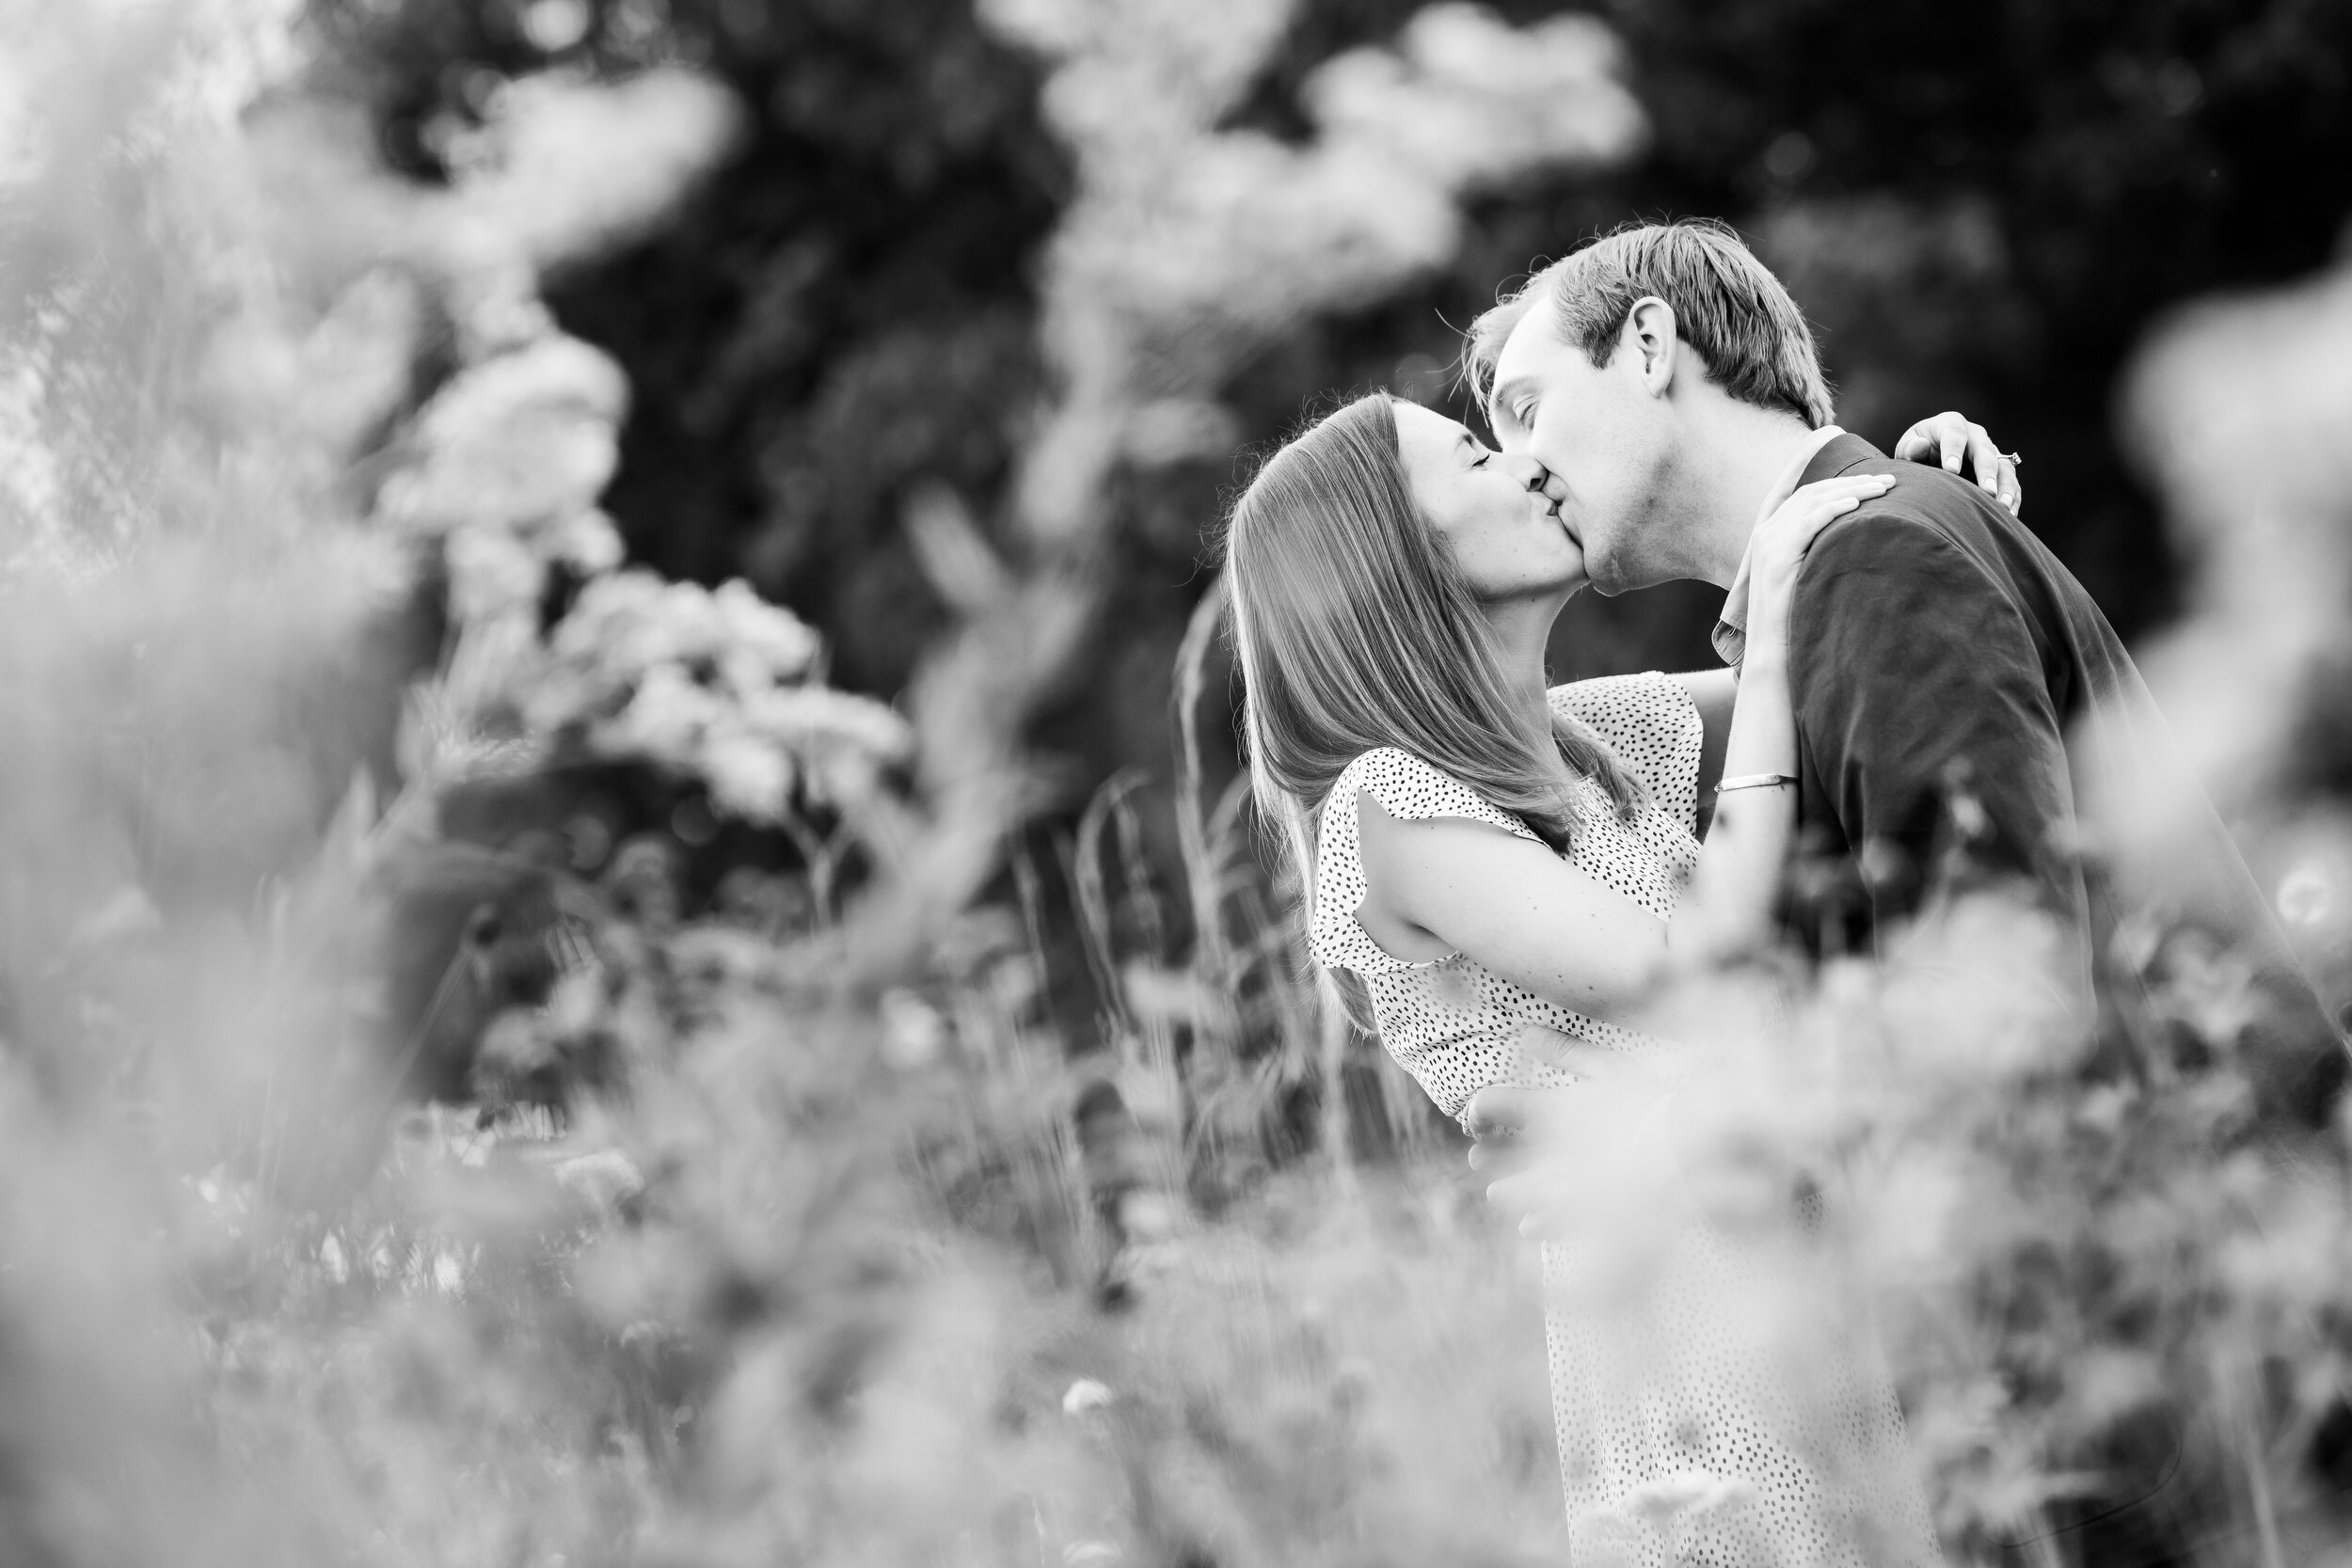 Lincoln Park Nature Boardwalk engagement photos by J. Brown Photography